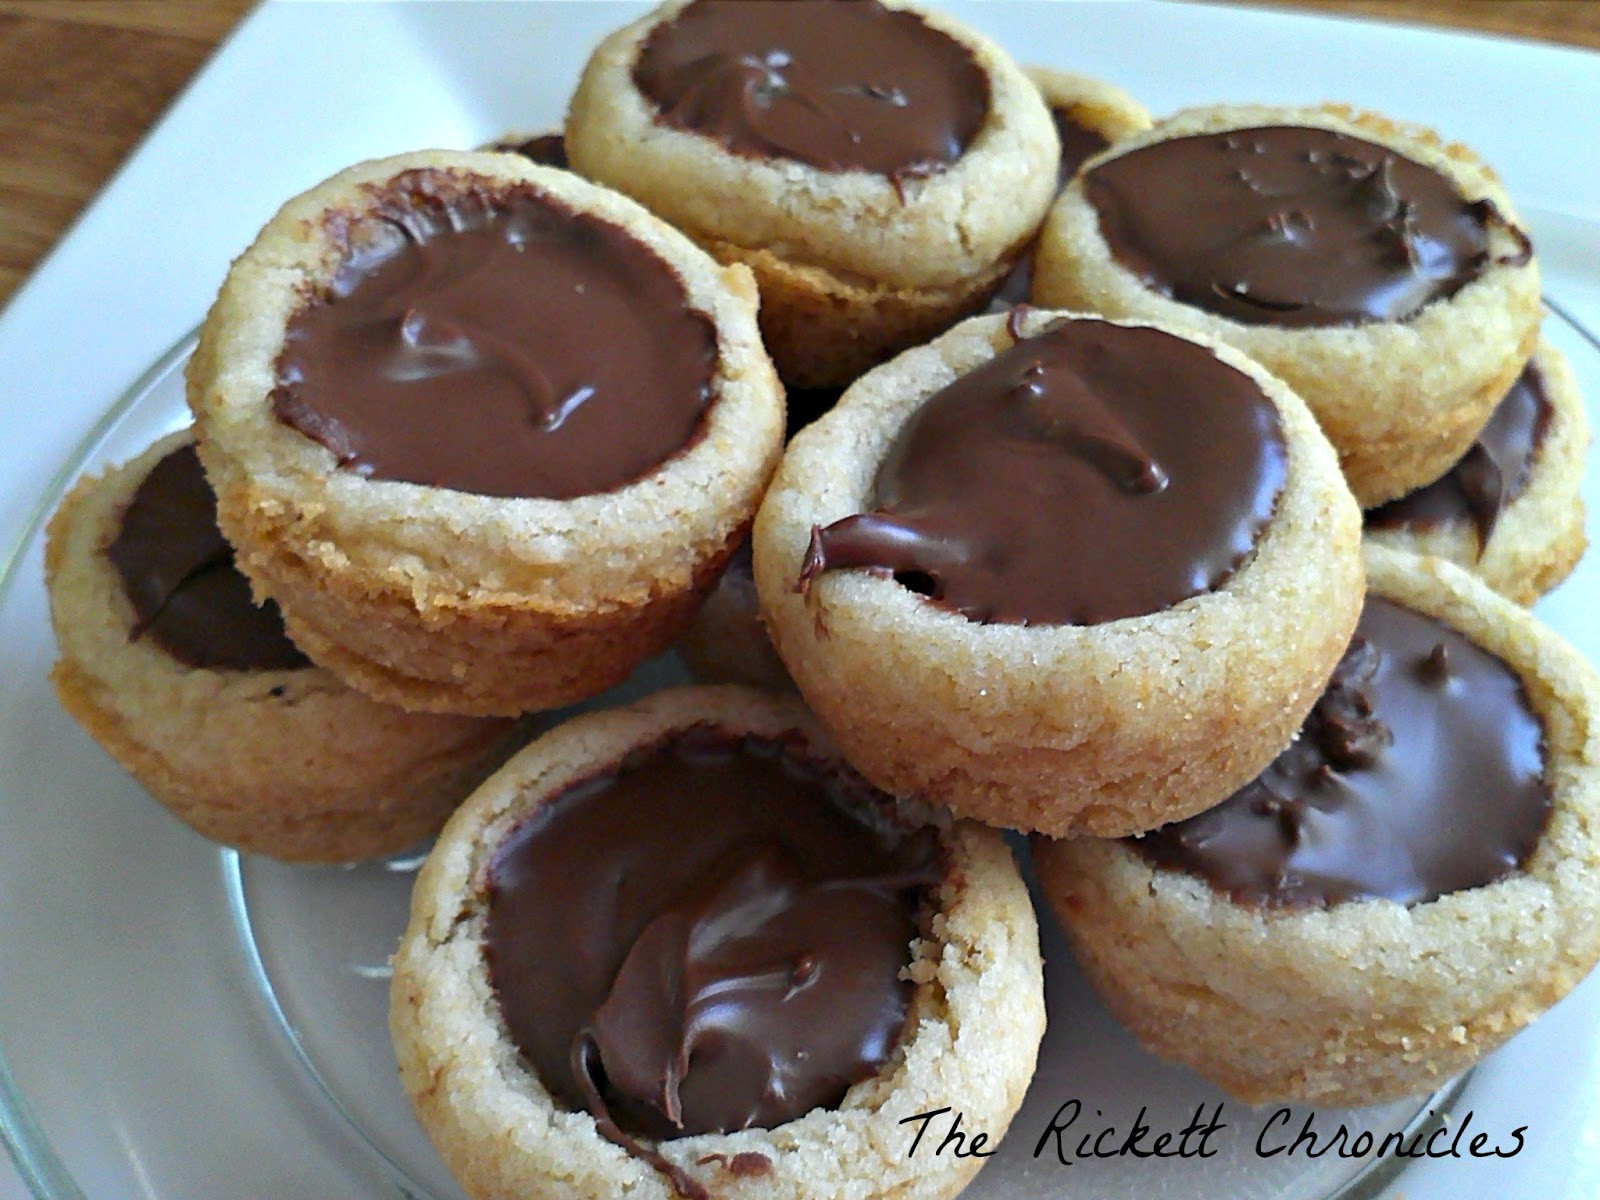 Nutella Filled Cookies
 The Rickett Chronicles Recipe Nutella Filled Sugar